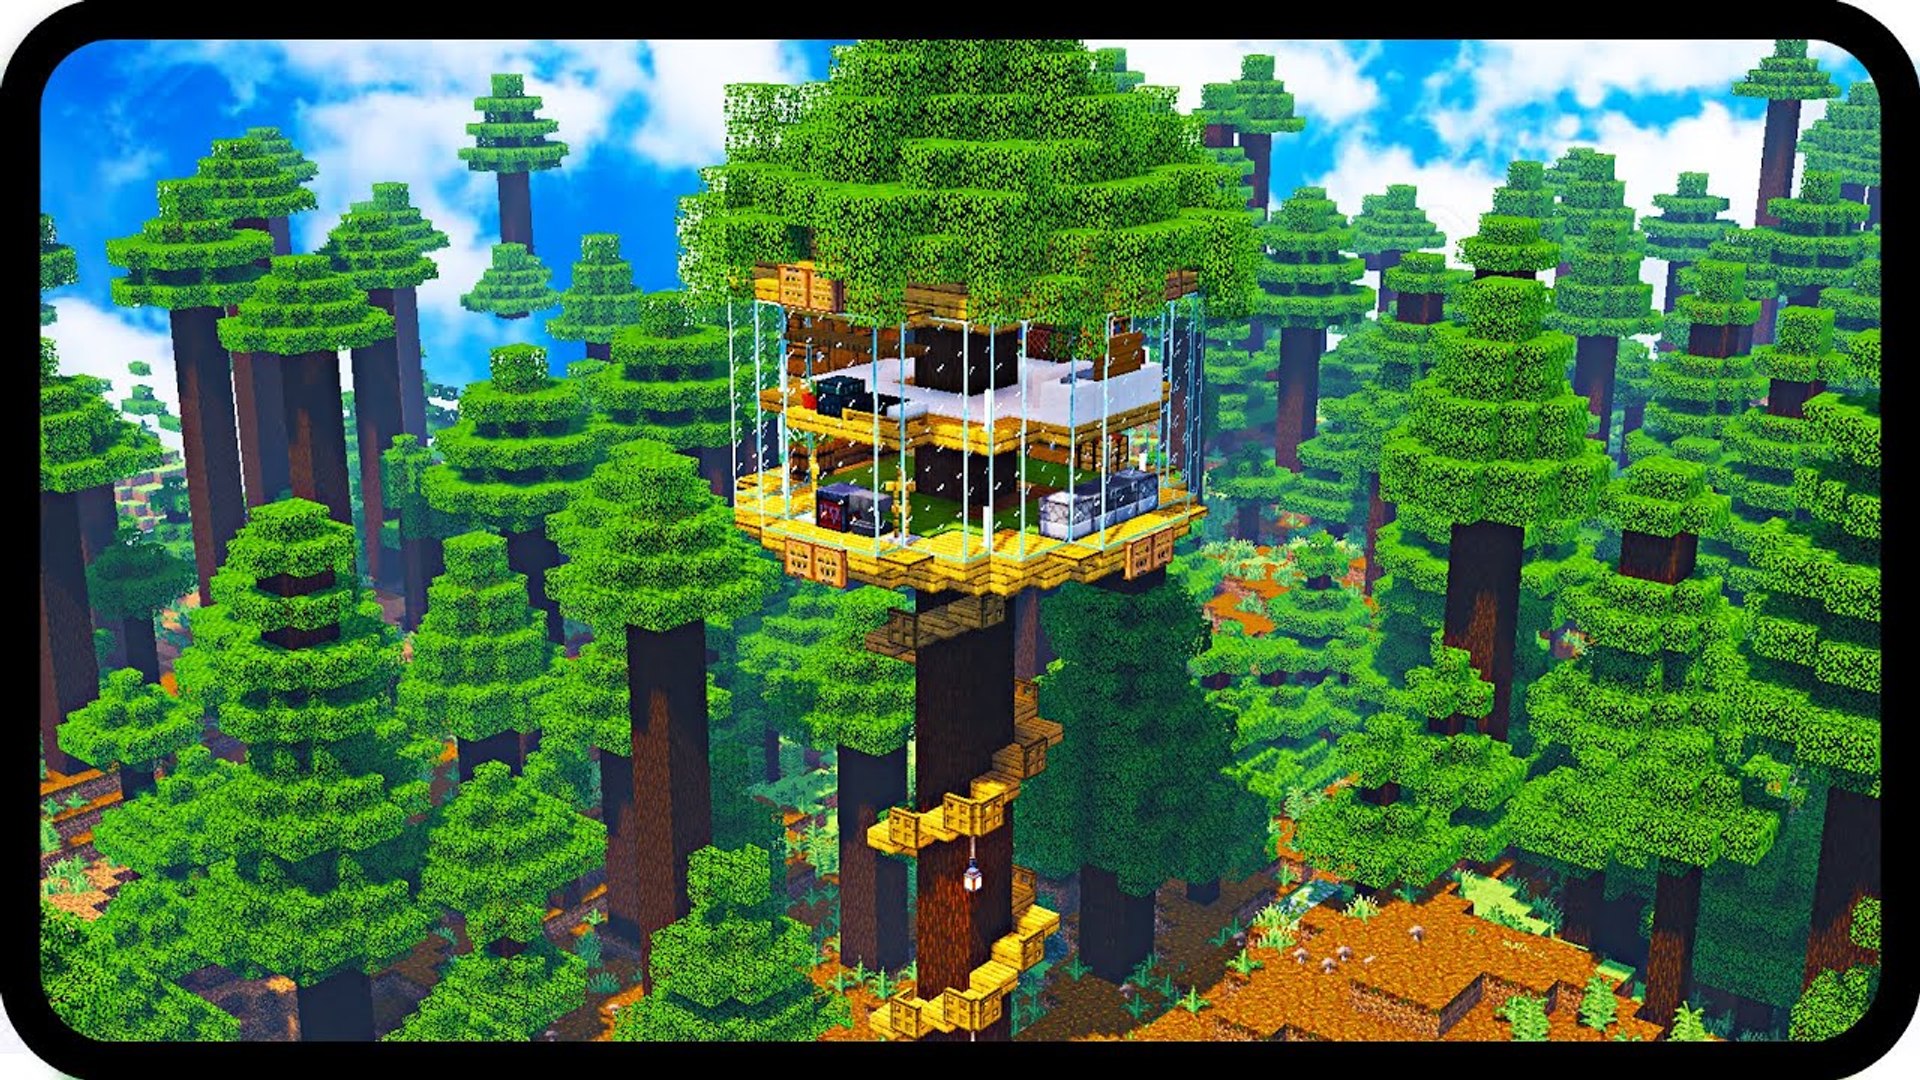 Minecraft- How to build a Treehouse - Minecraft Treehouse Tutorial